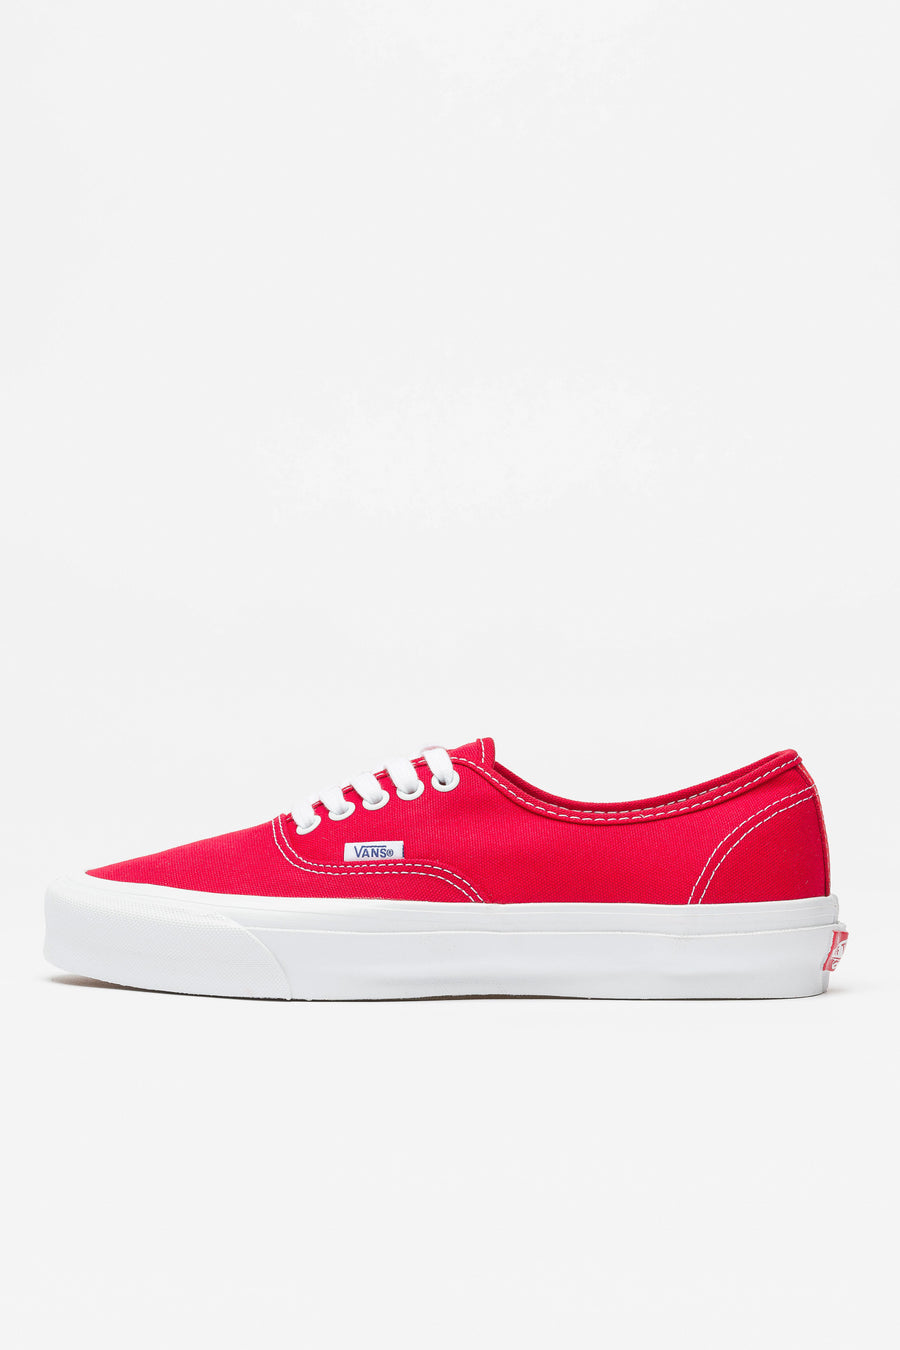 OG Authentic LX (Canvas) in Red/True White